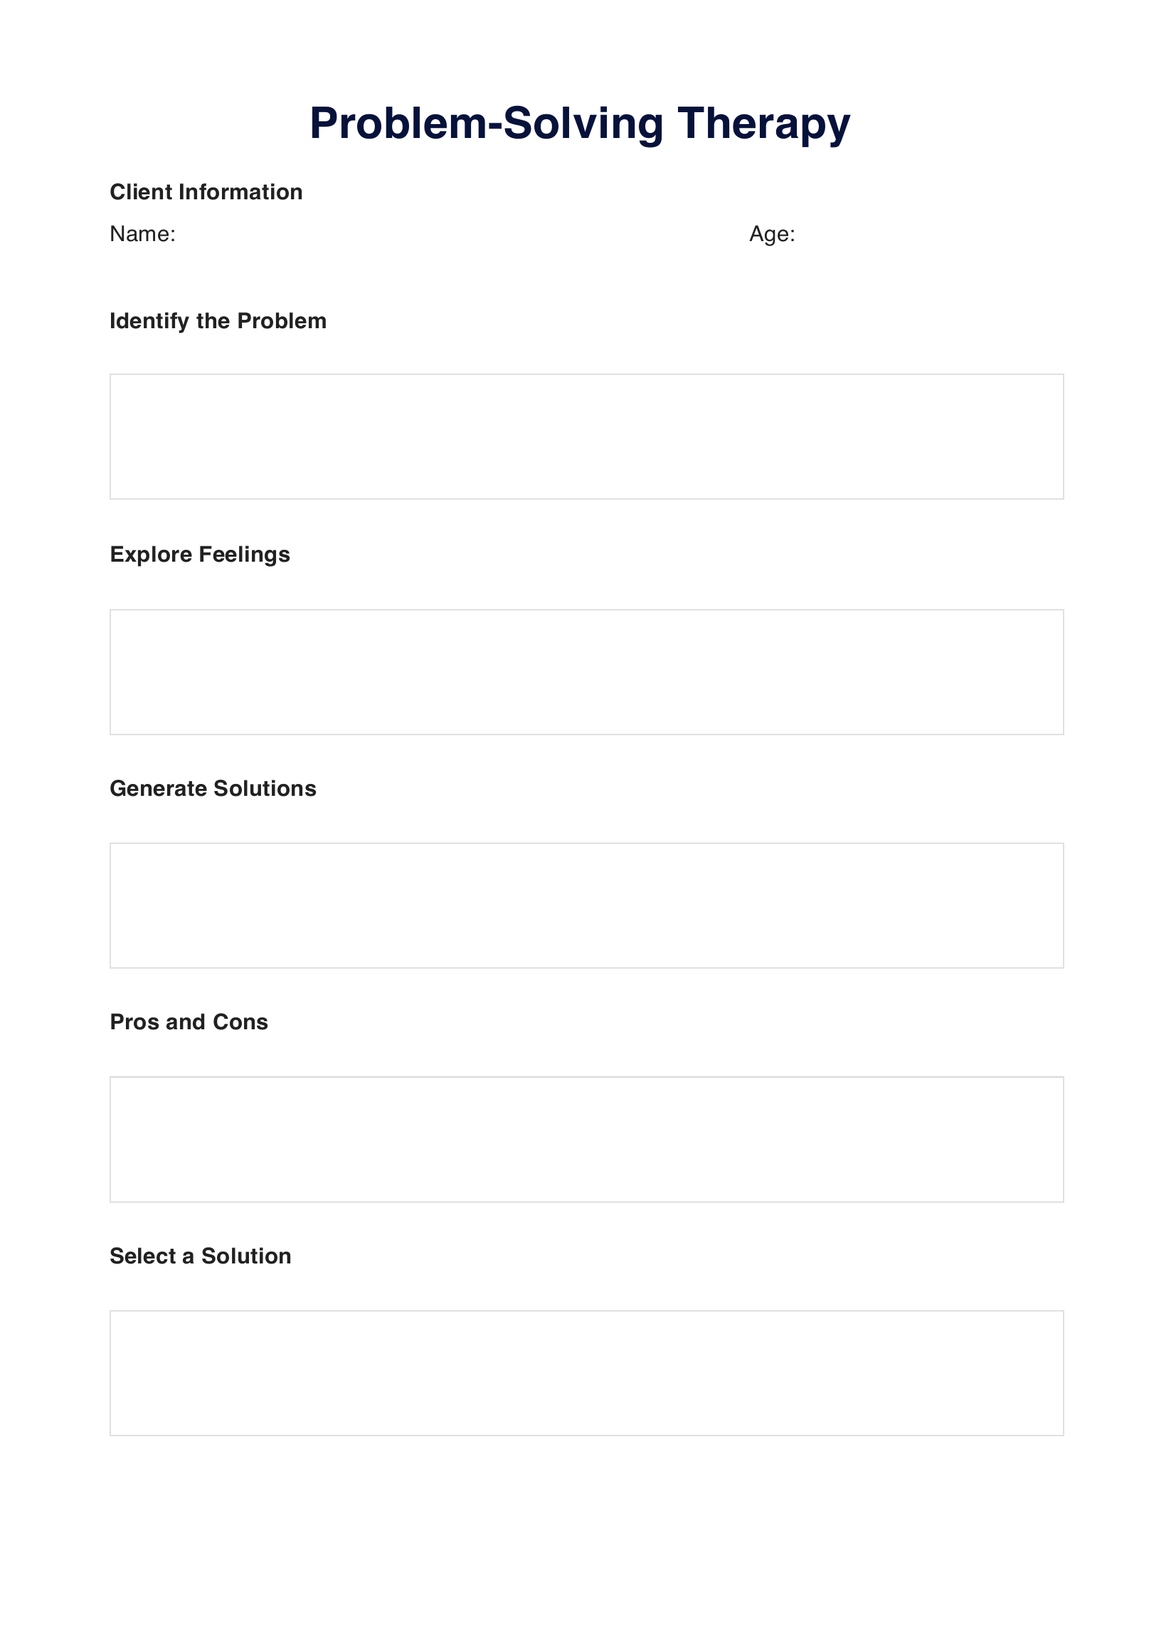 Problem Solving Therapy Worksheet PDF Example